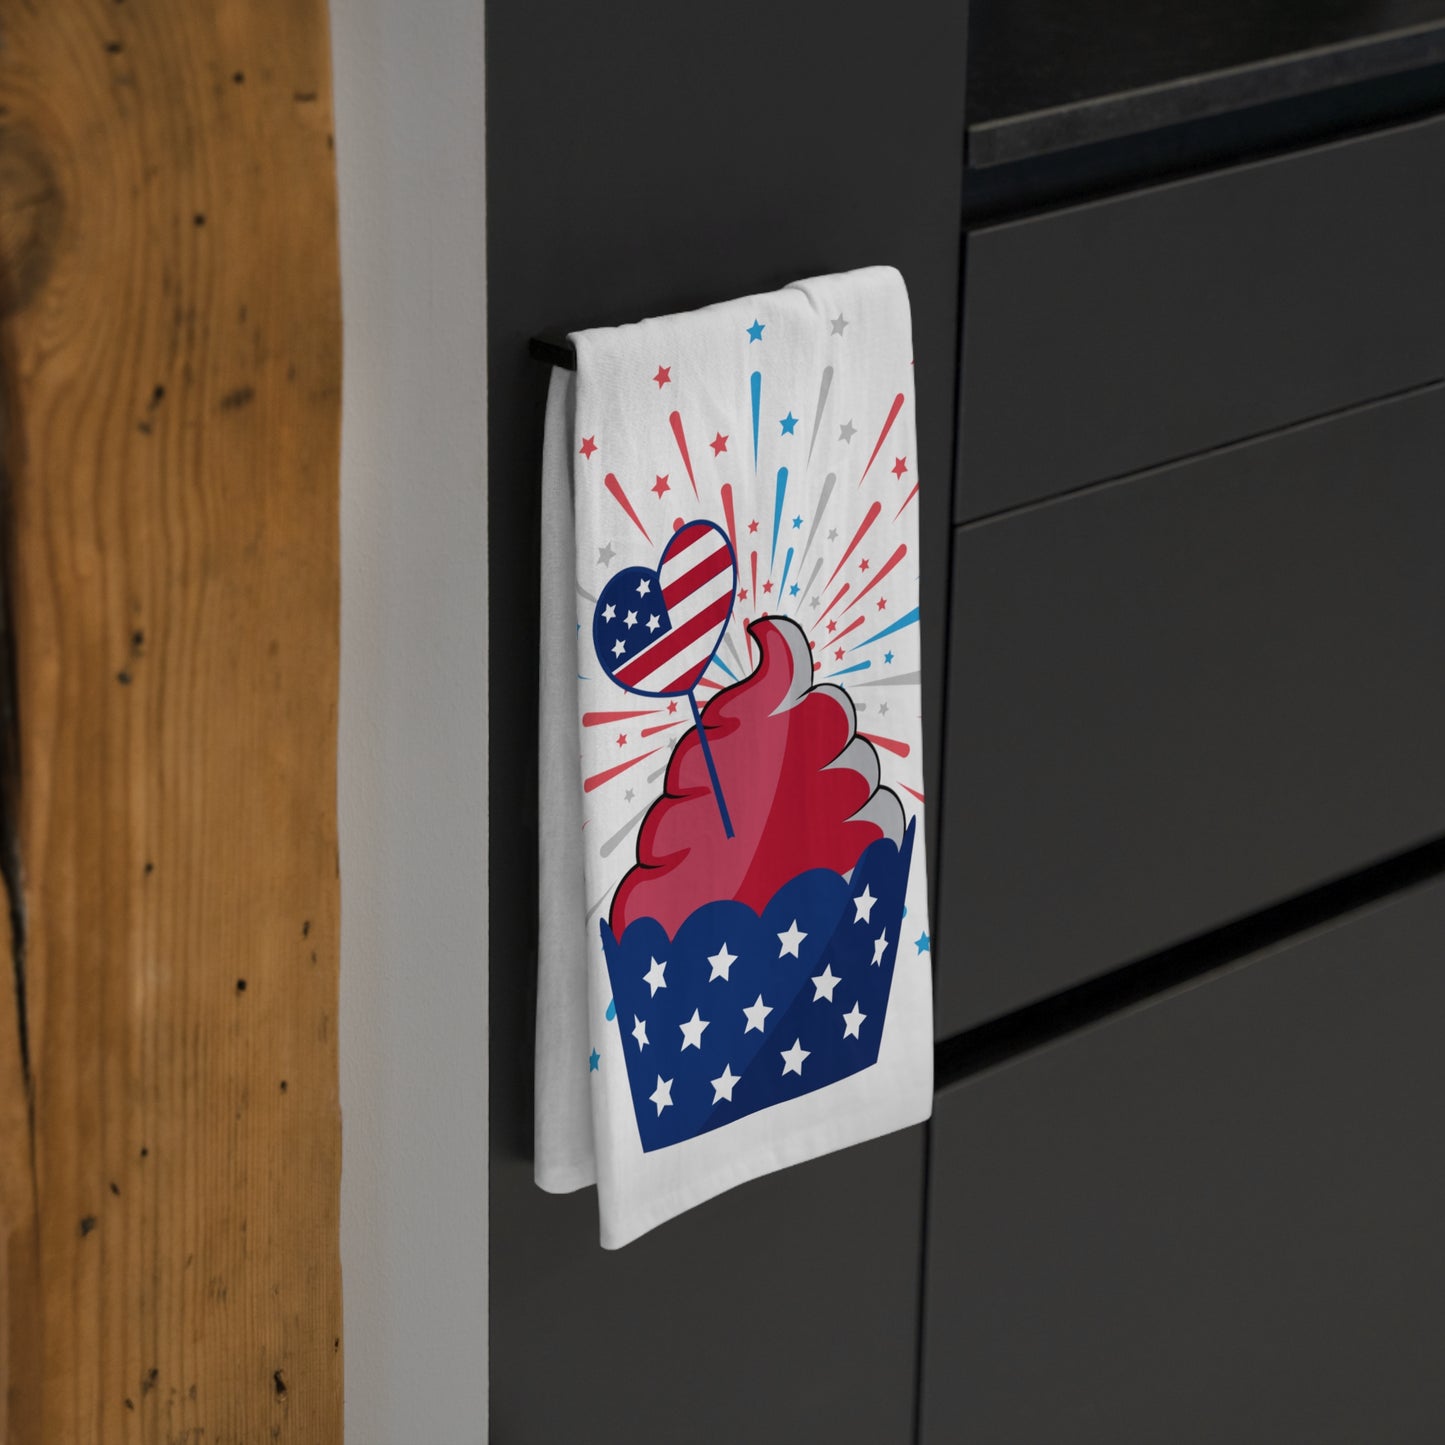 A festive touch of a Printify 100% cotton Decorative Kitchen Towel: Large 28" x 28"; Cotton; Patriotic on a cabinet.